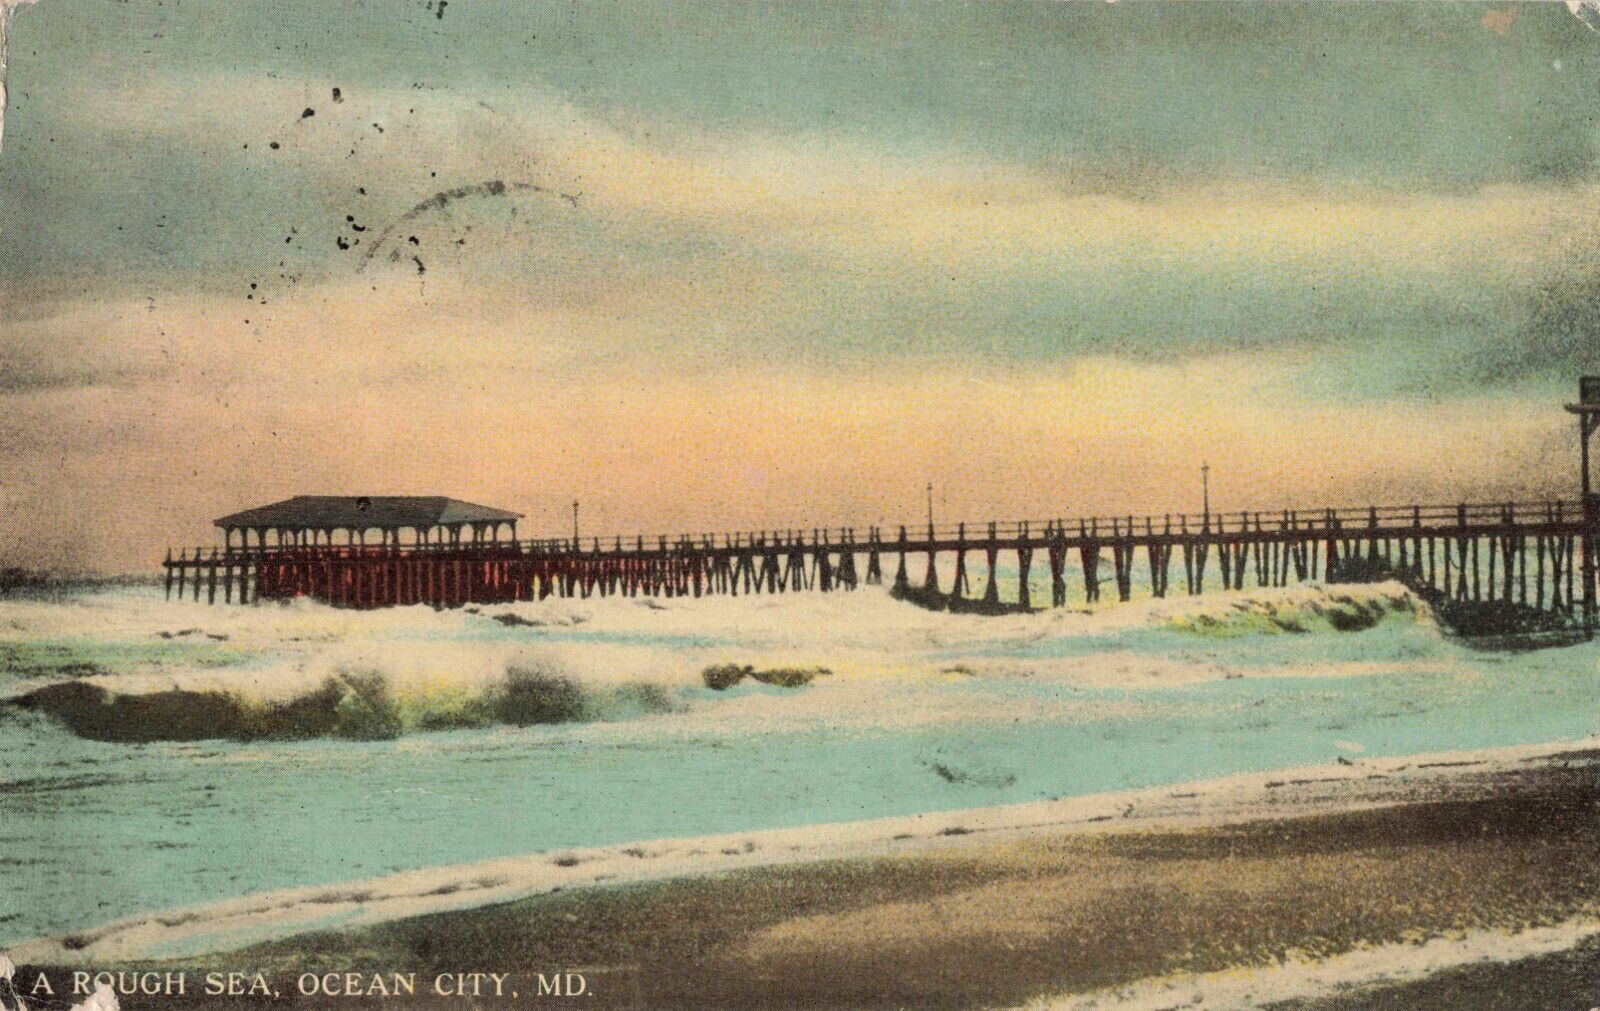 A Rough Sea View of Pier Ocean City Maryland MD 1912 Vintage Postcard